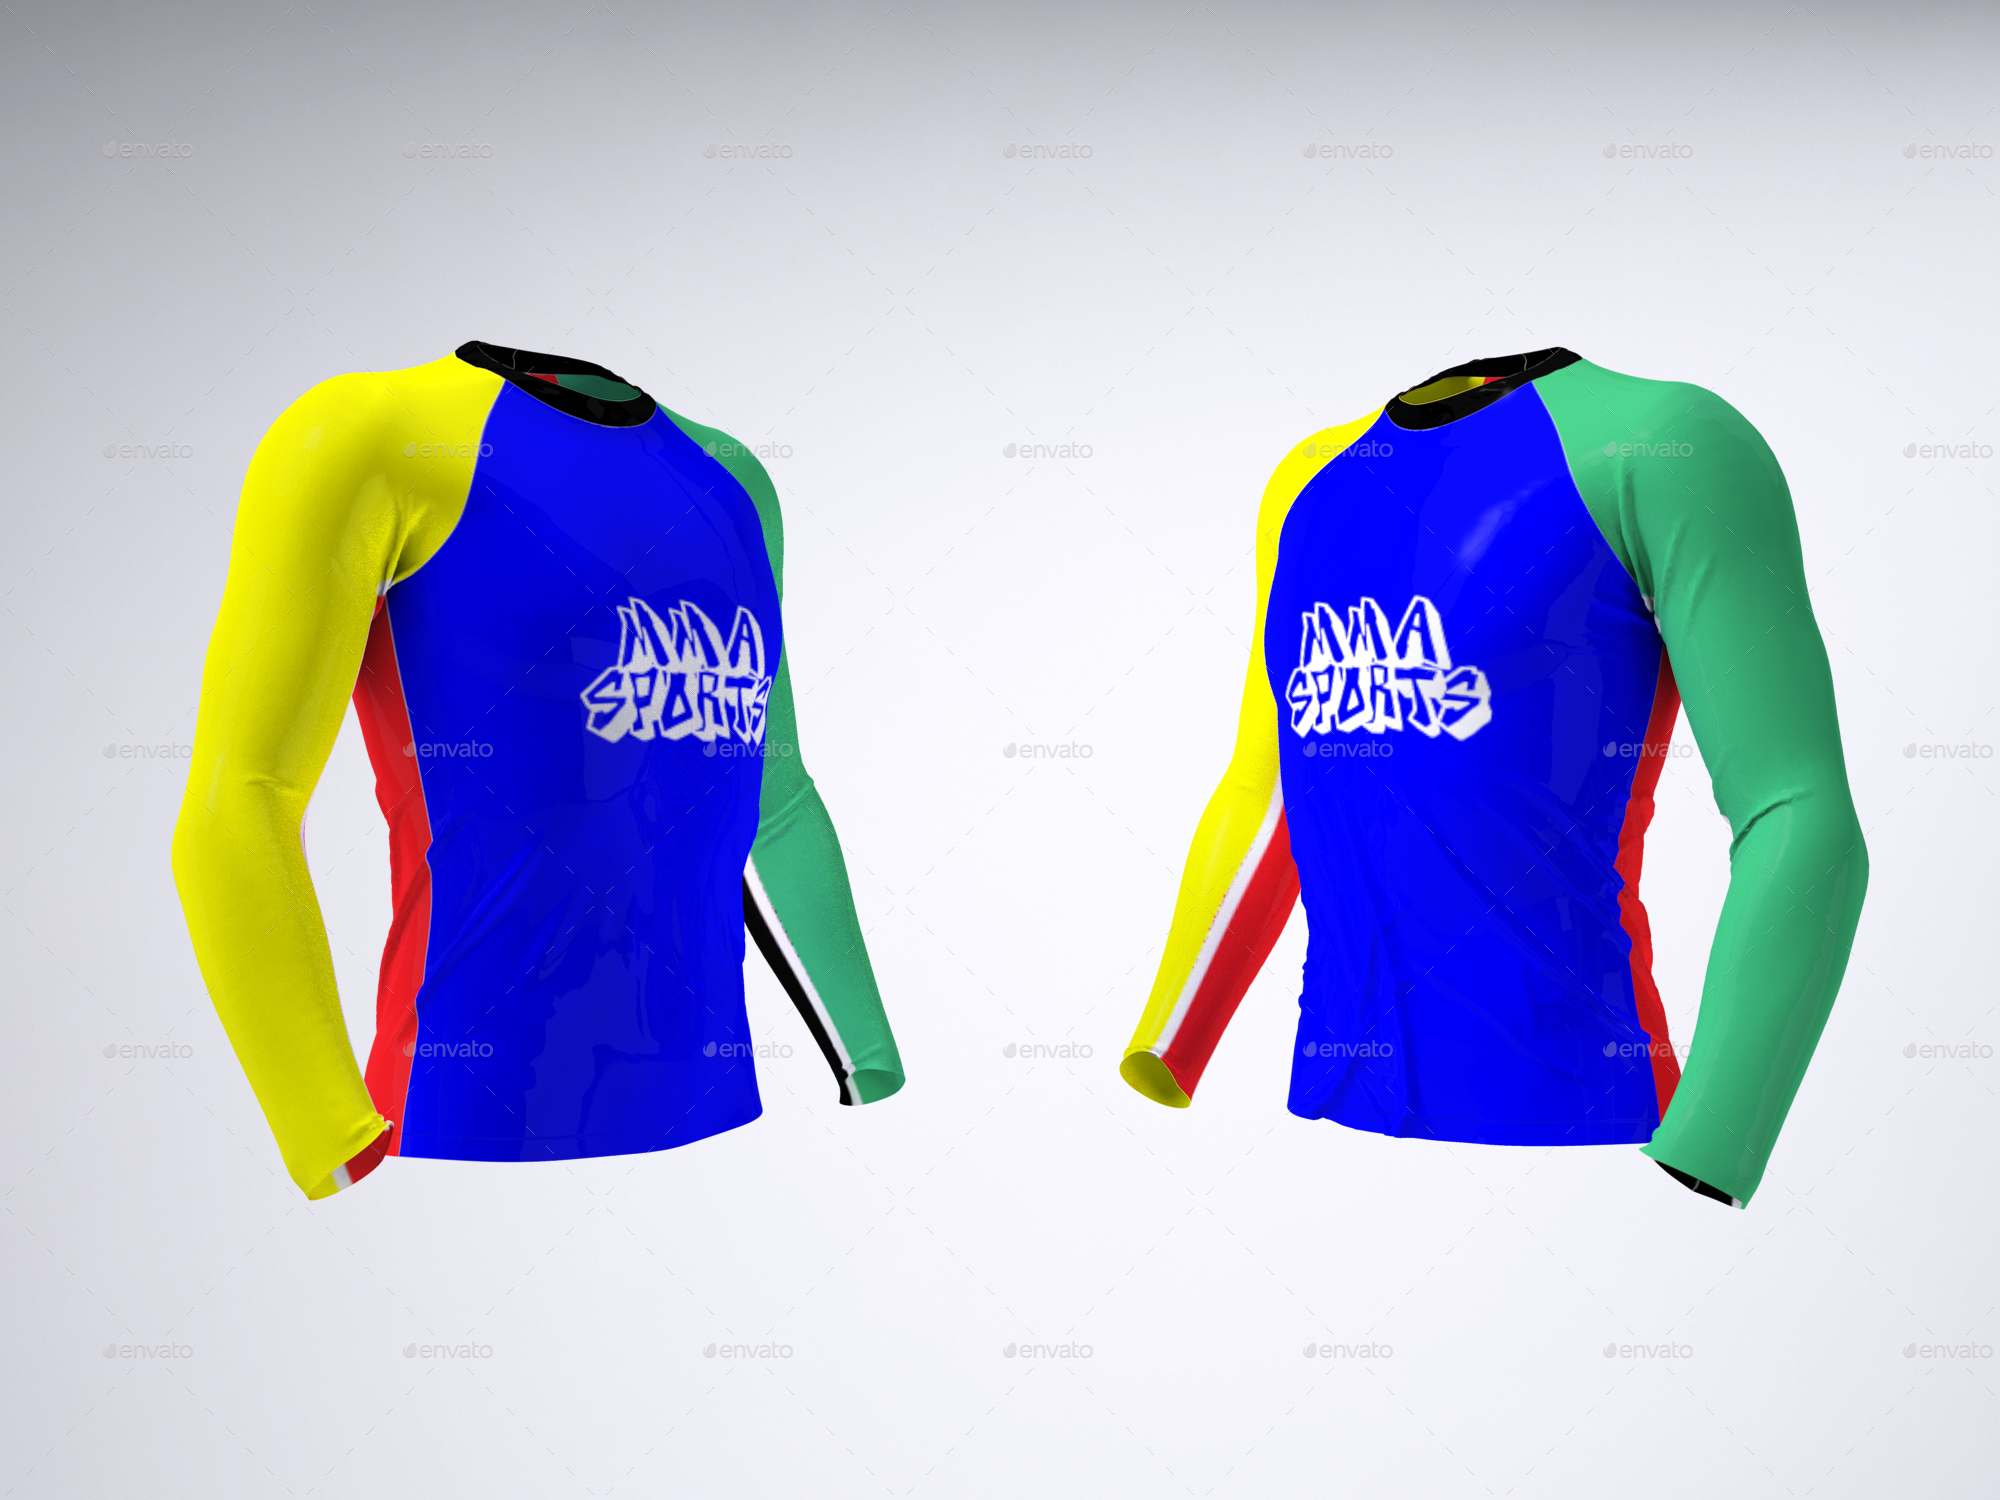 Download Grappling Rash Guard and Spats Mock-Up by Sanchi477 | GraphicRiver